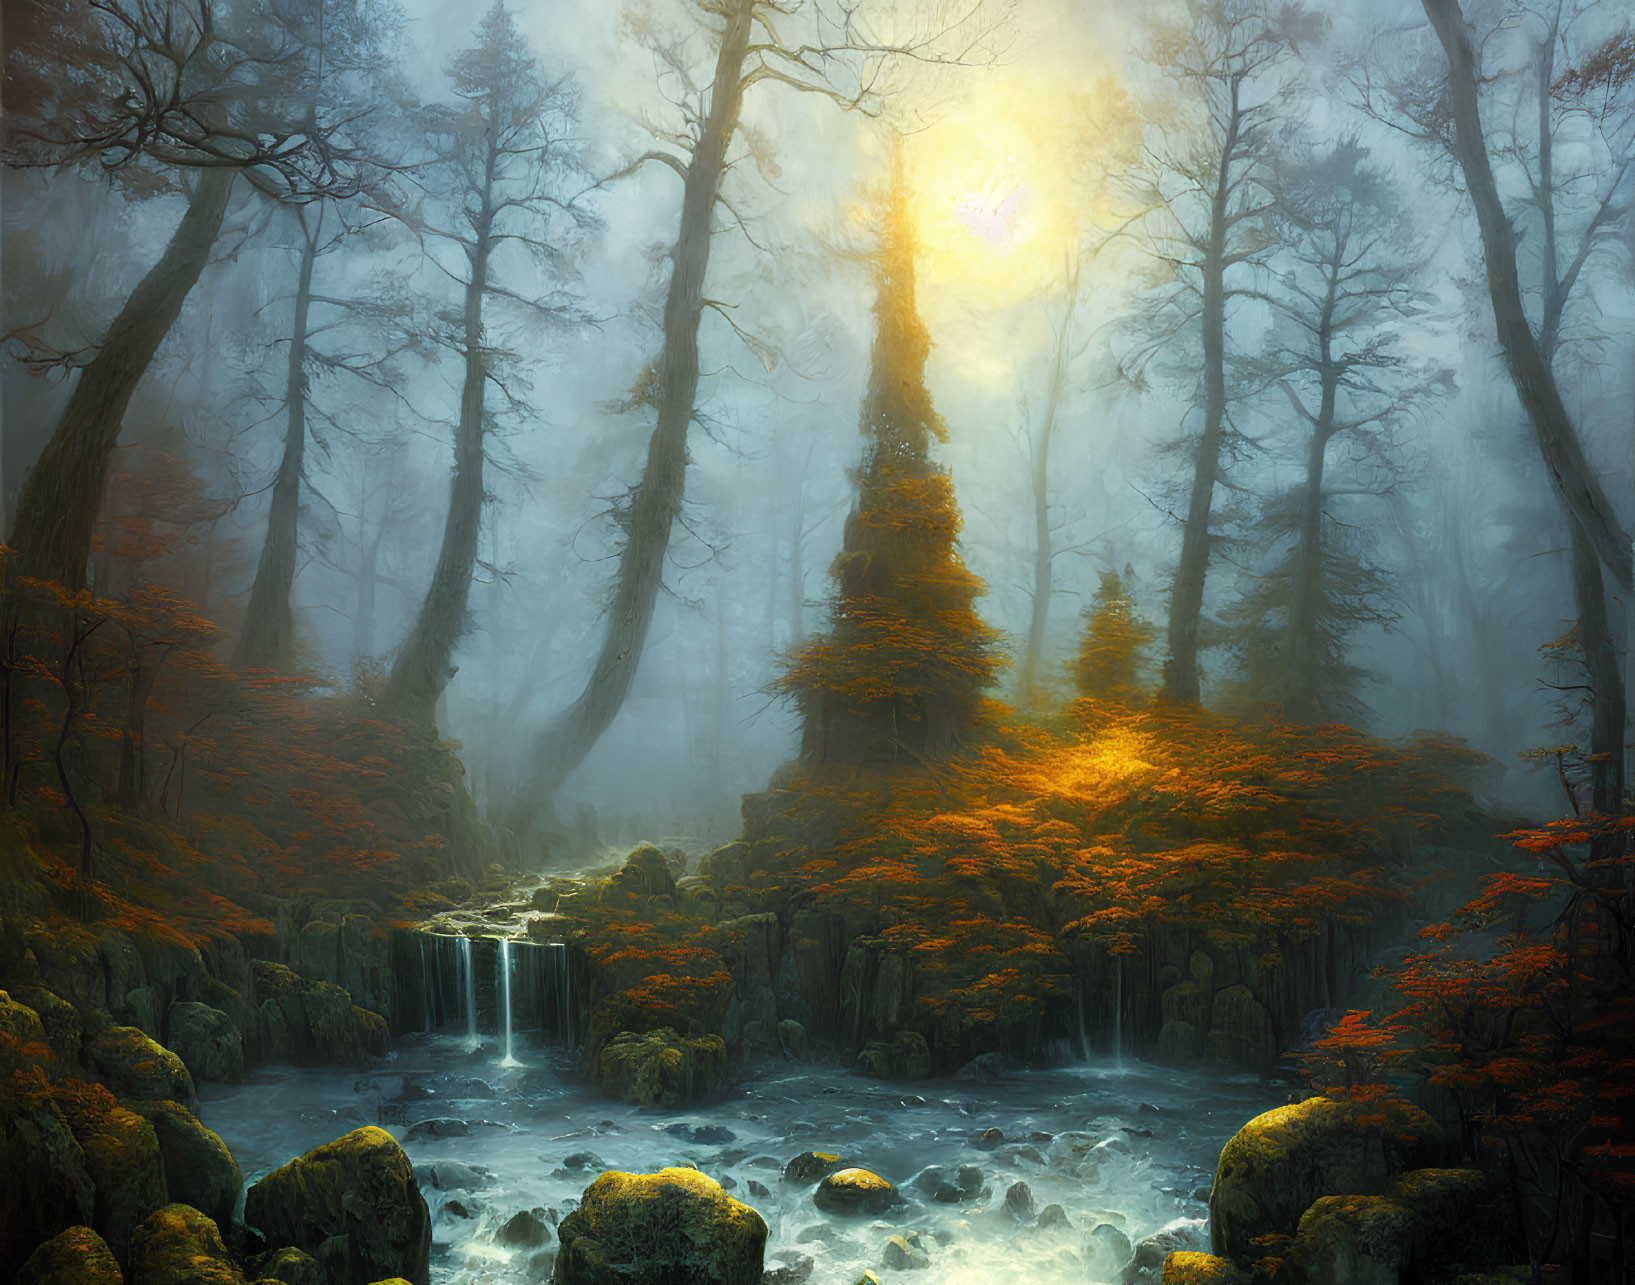 Tranquil forest landscape with waterfall, autumn trees, sun rays, and mossy stream